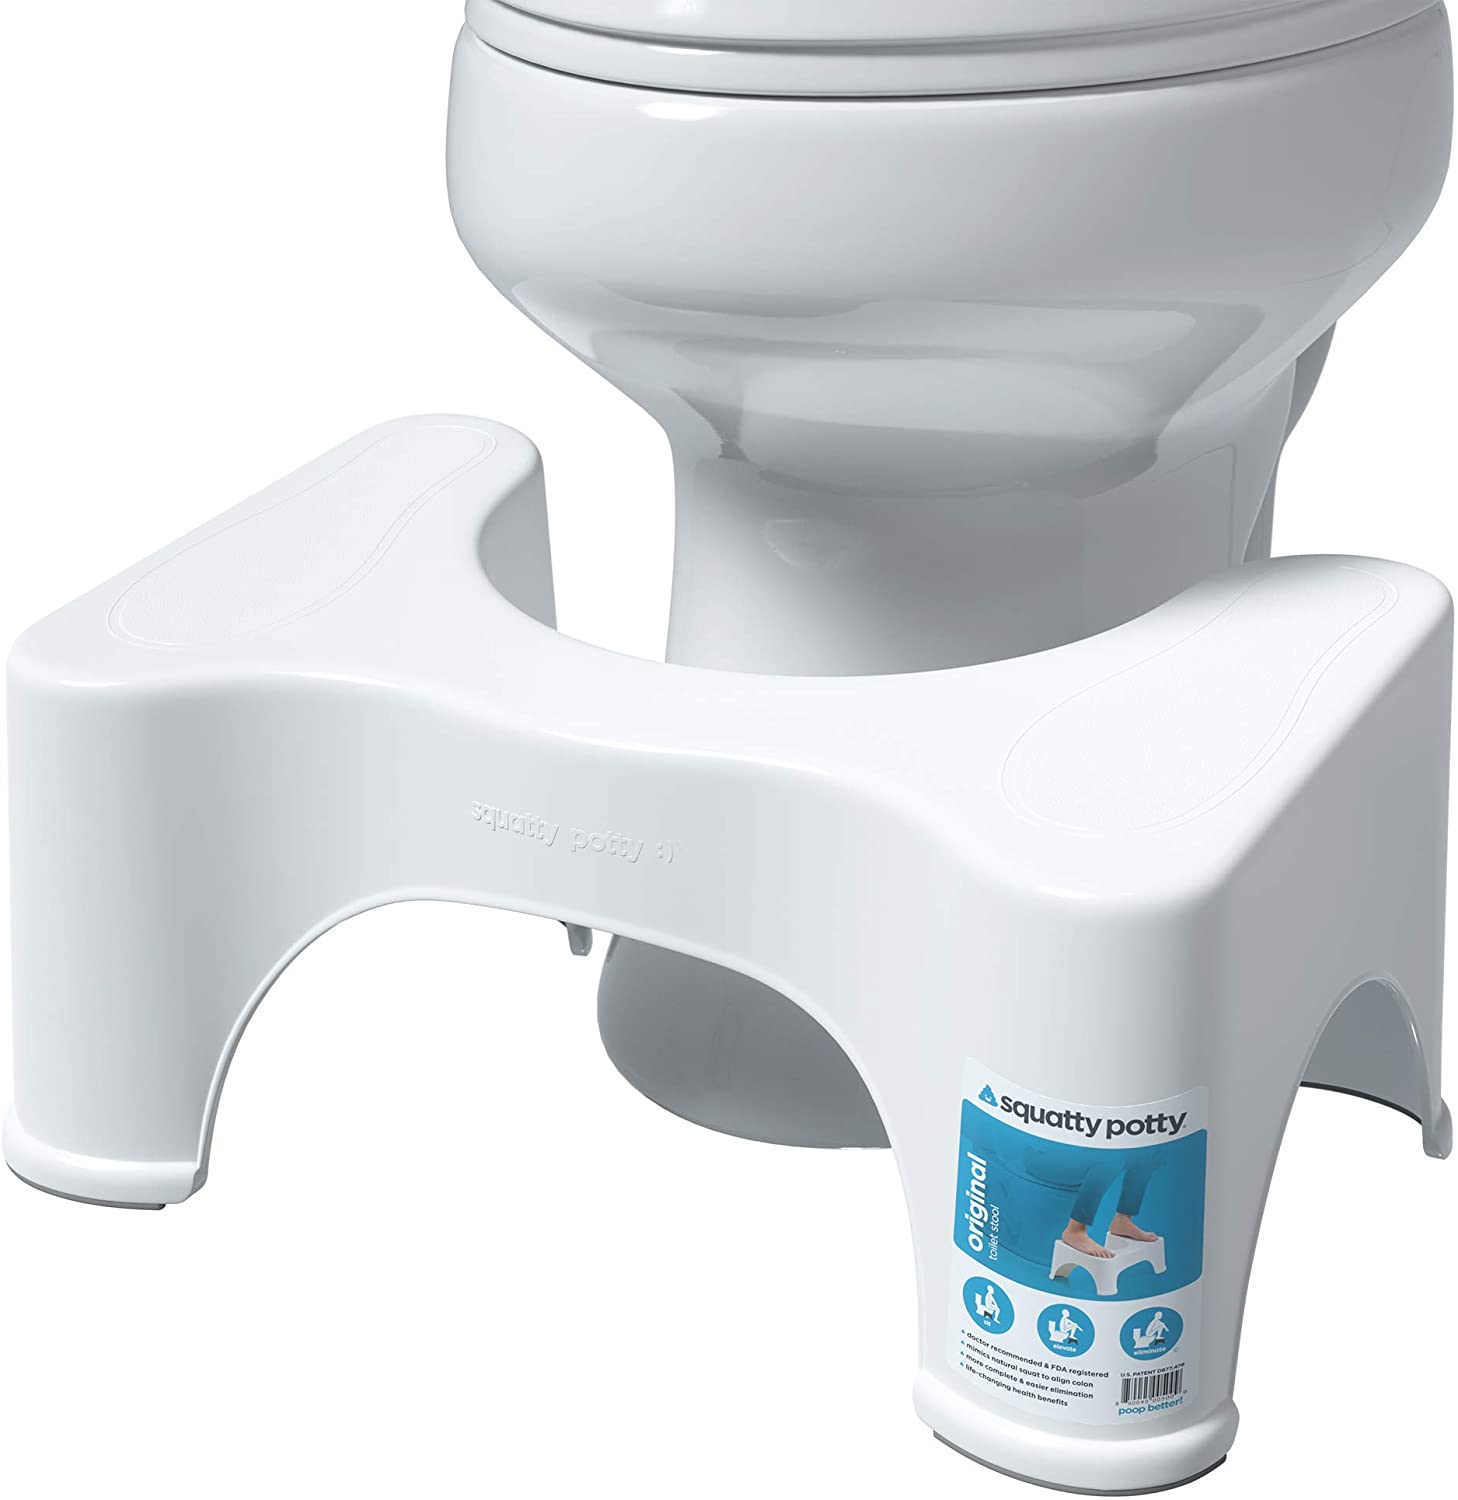 How To Use Squatty Potty Video